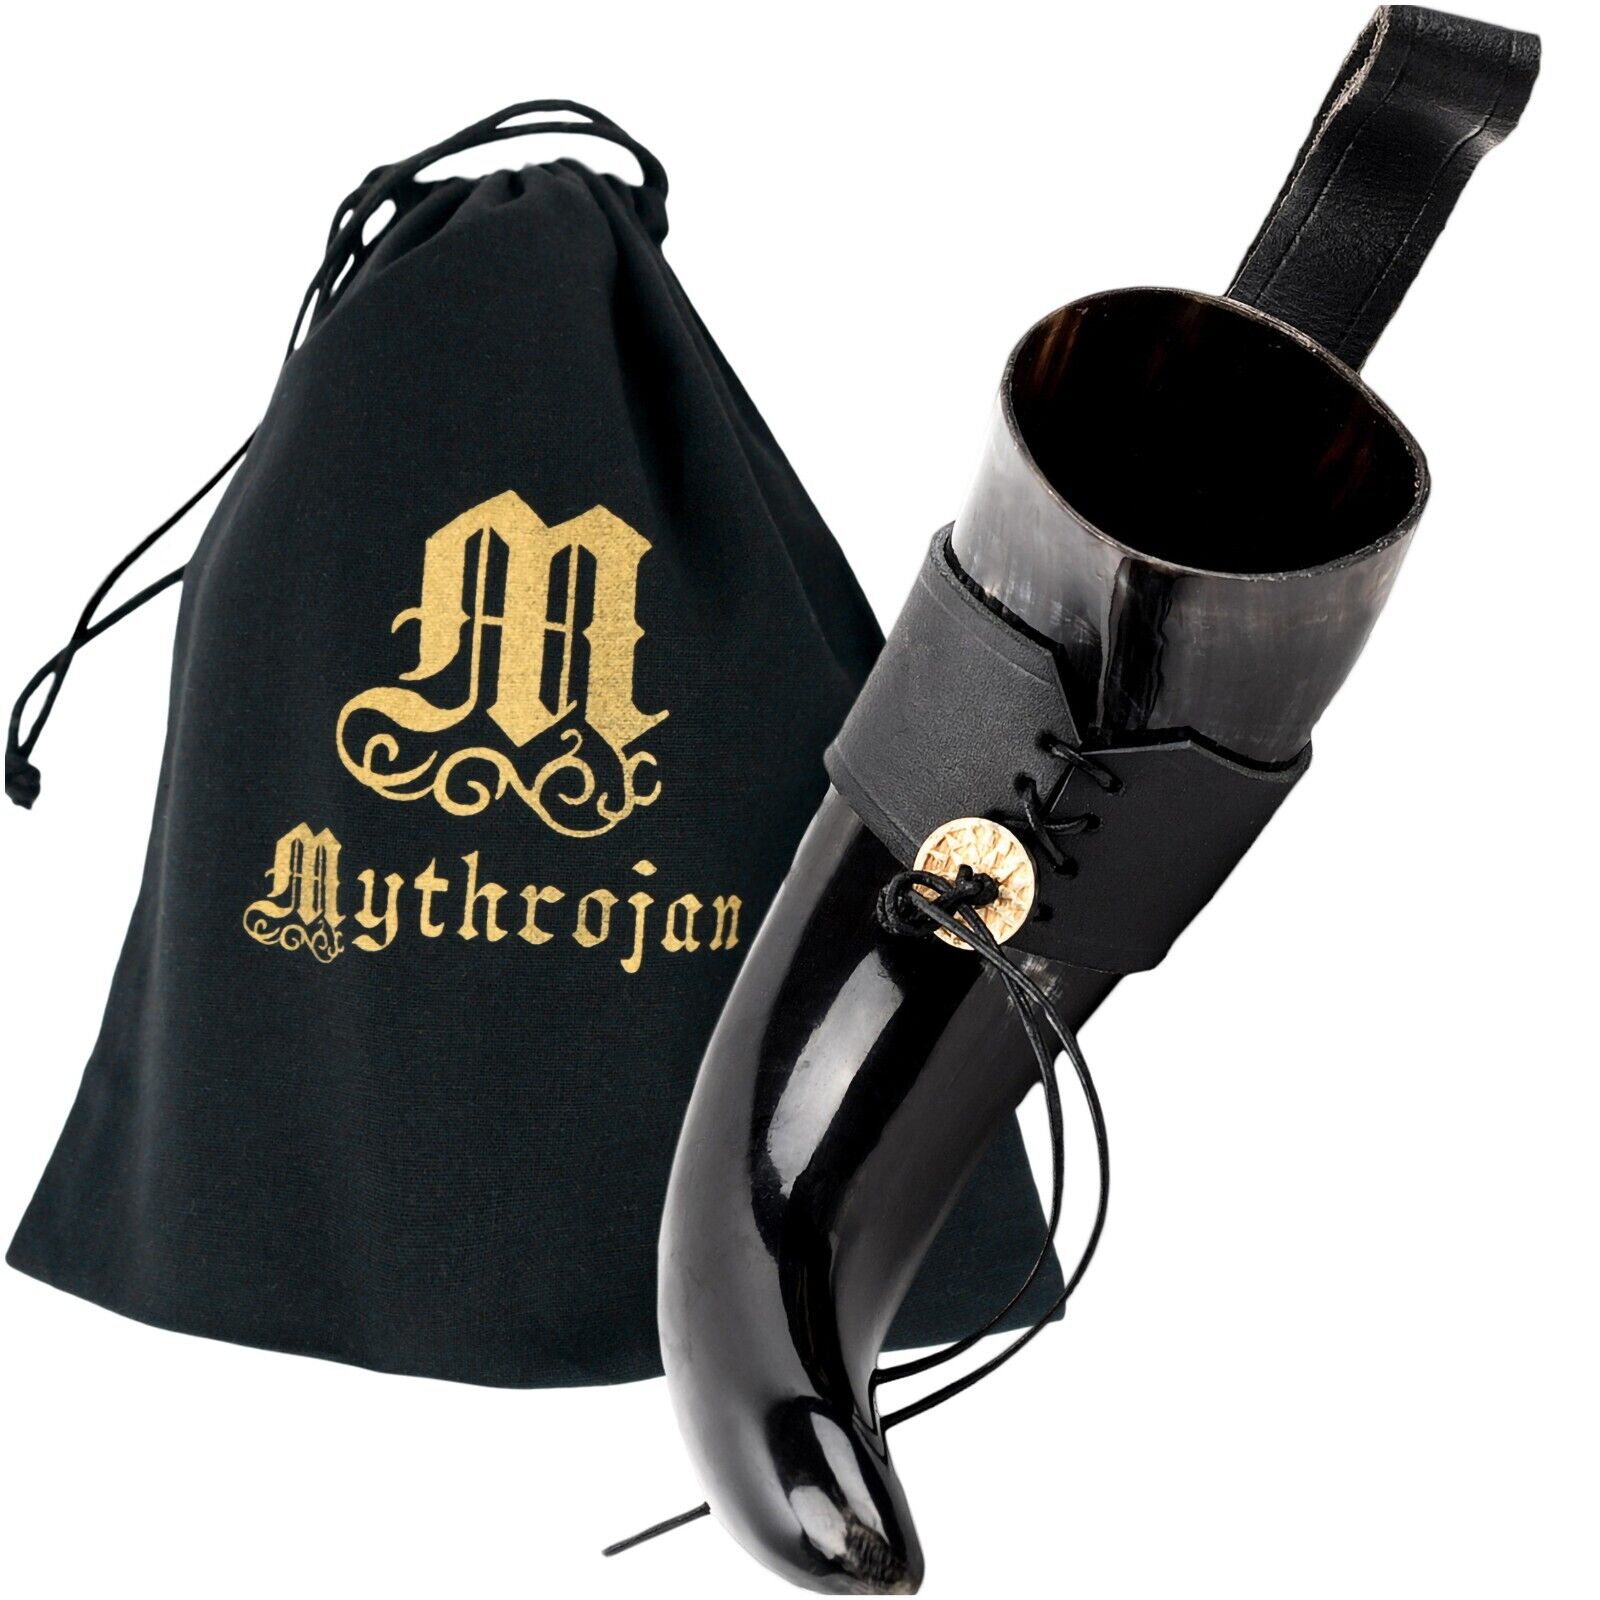  400 ML Viking Drinking Horn Mug with Leather Holder & Free Canvas Gift Bag